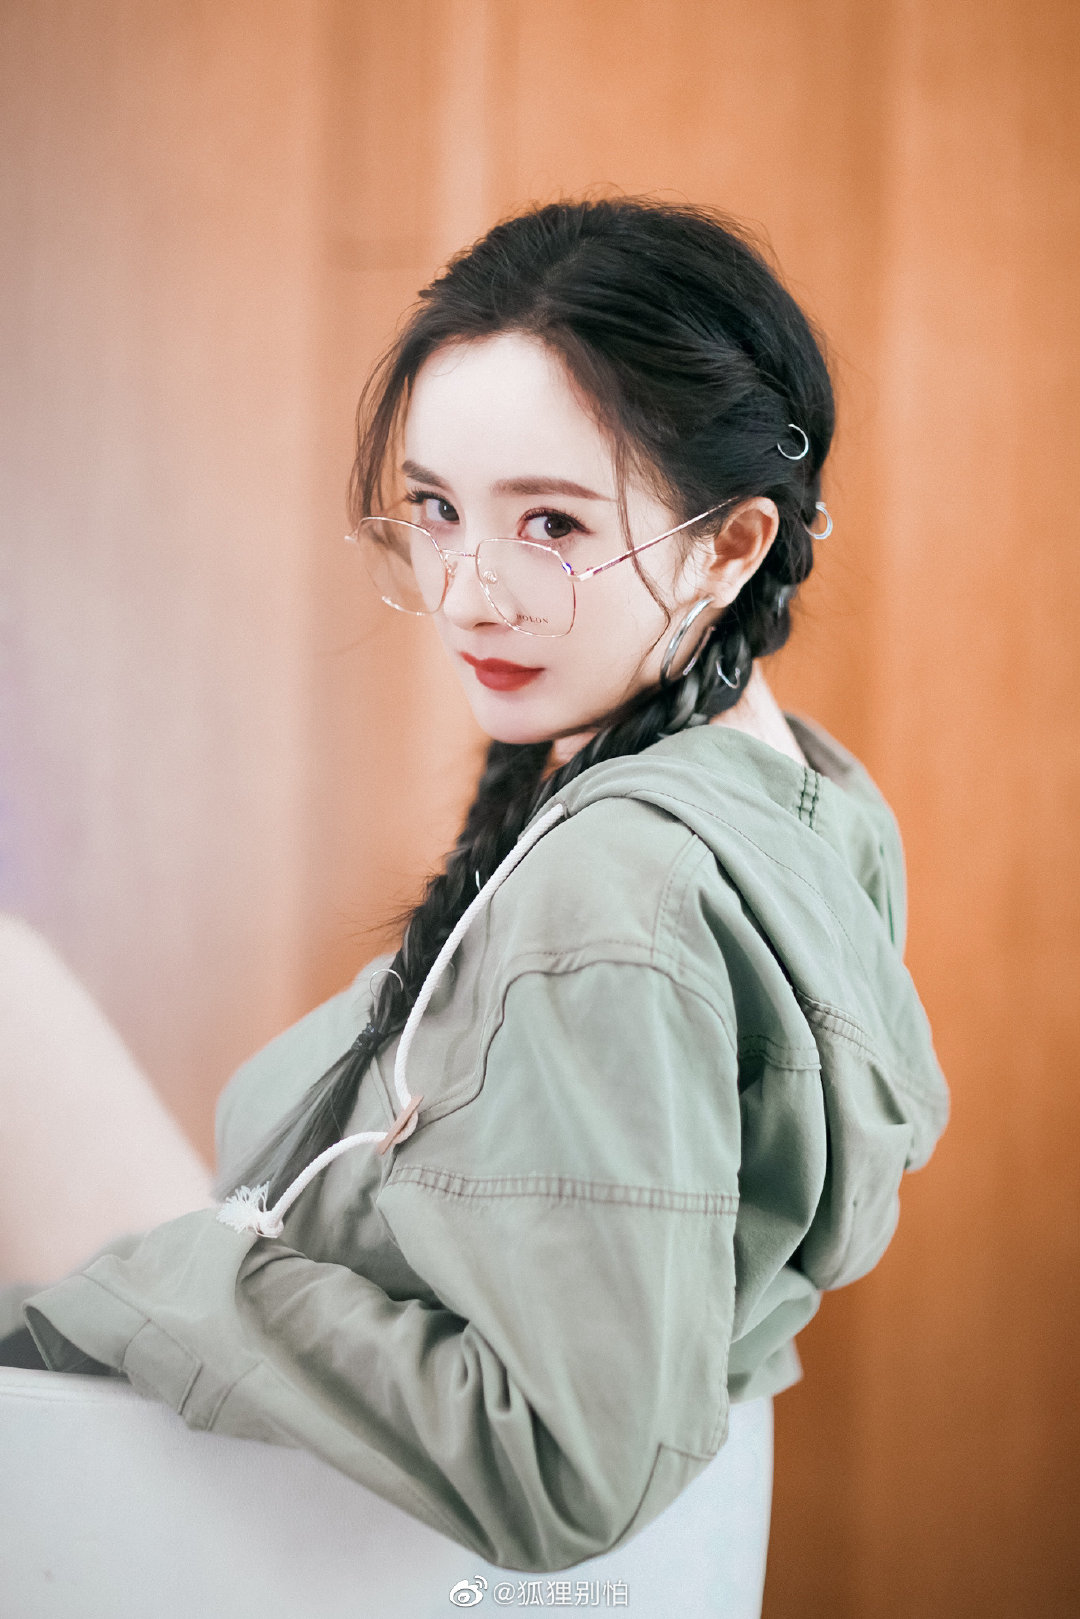 Yang Mi Tan Bai young thin aesthetic, express oneself also not up to mark, hope the girl can be treated by fairness